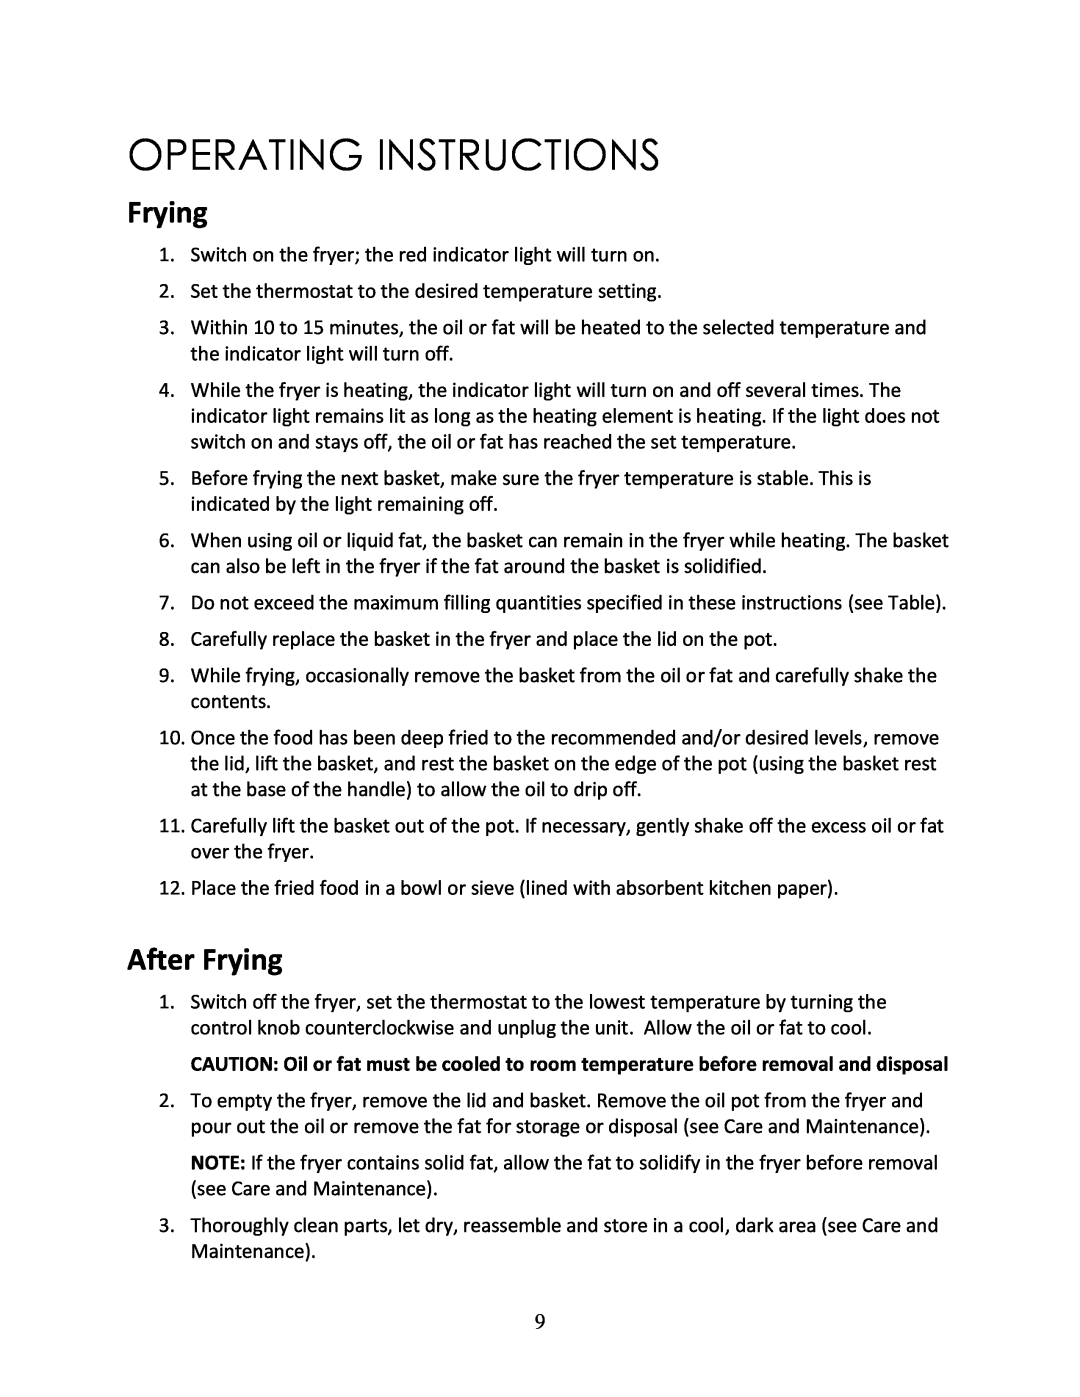 Magic Chef MCSDF6ST instruction manual Operating Instructions, After Frying 